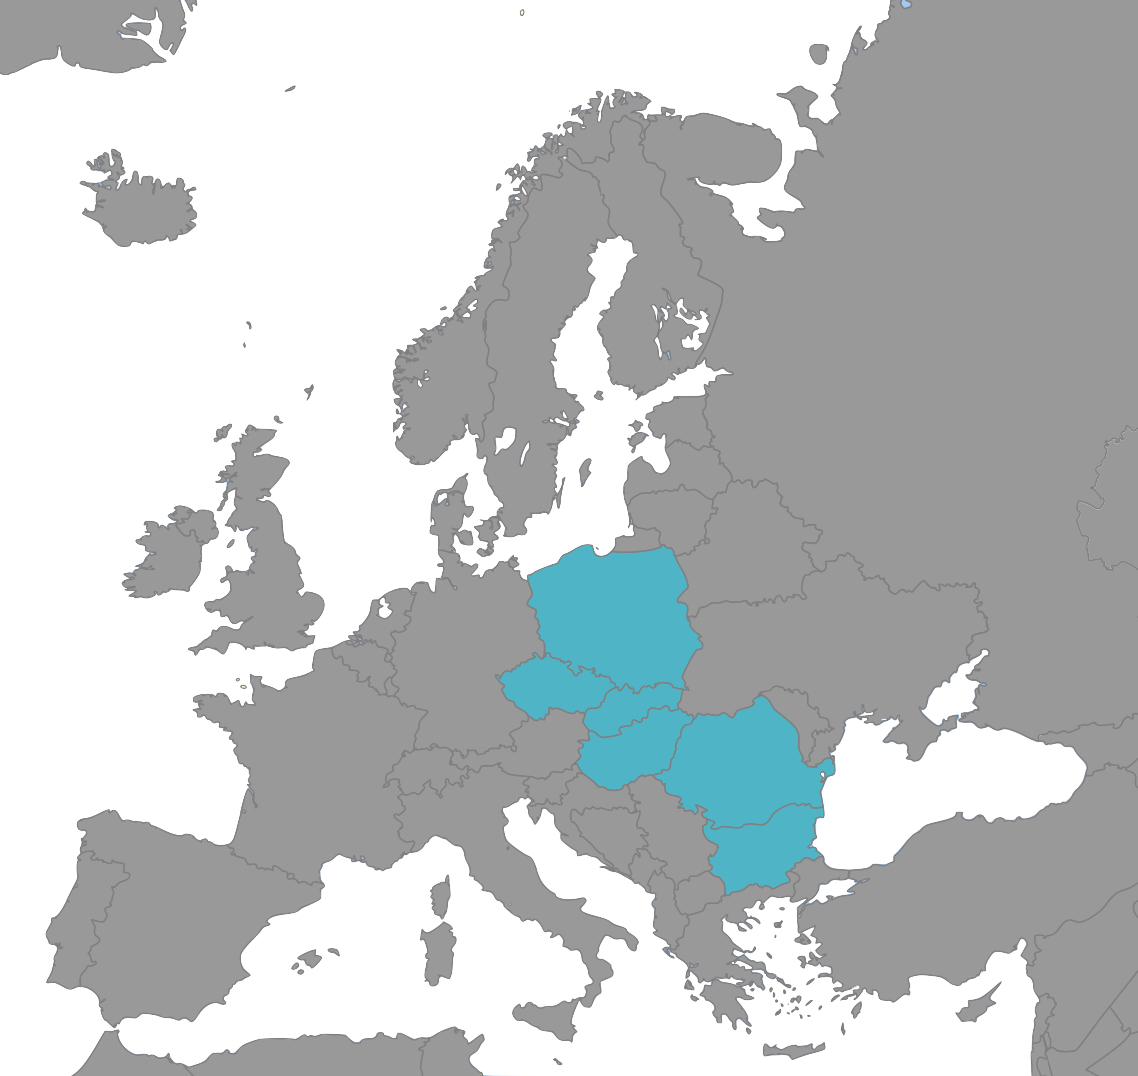 Grey map of Europe showing  Hungary, Poland, Czechia, Romania, and Bulgaria in blue for RP-CRO clinical operations.